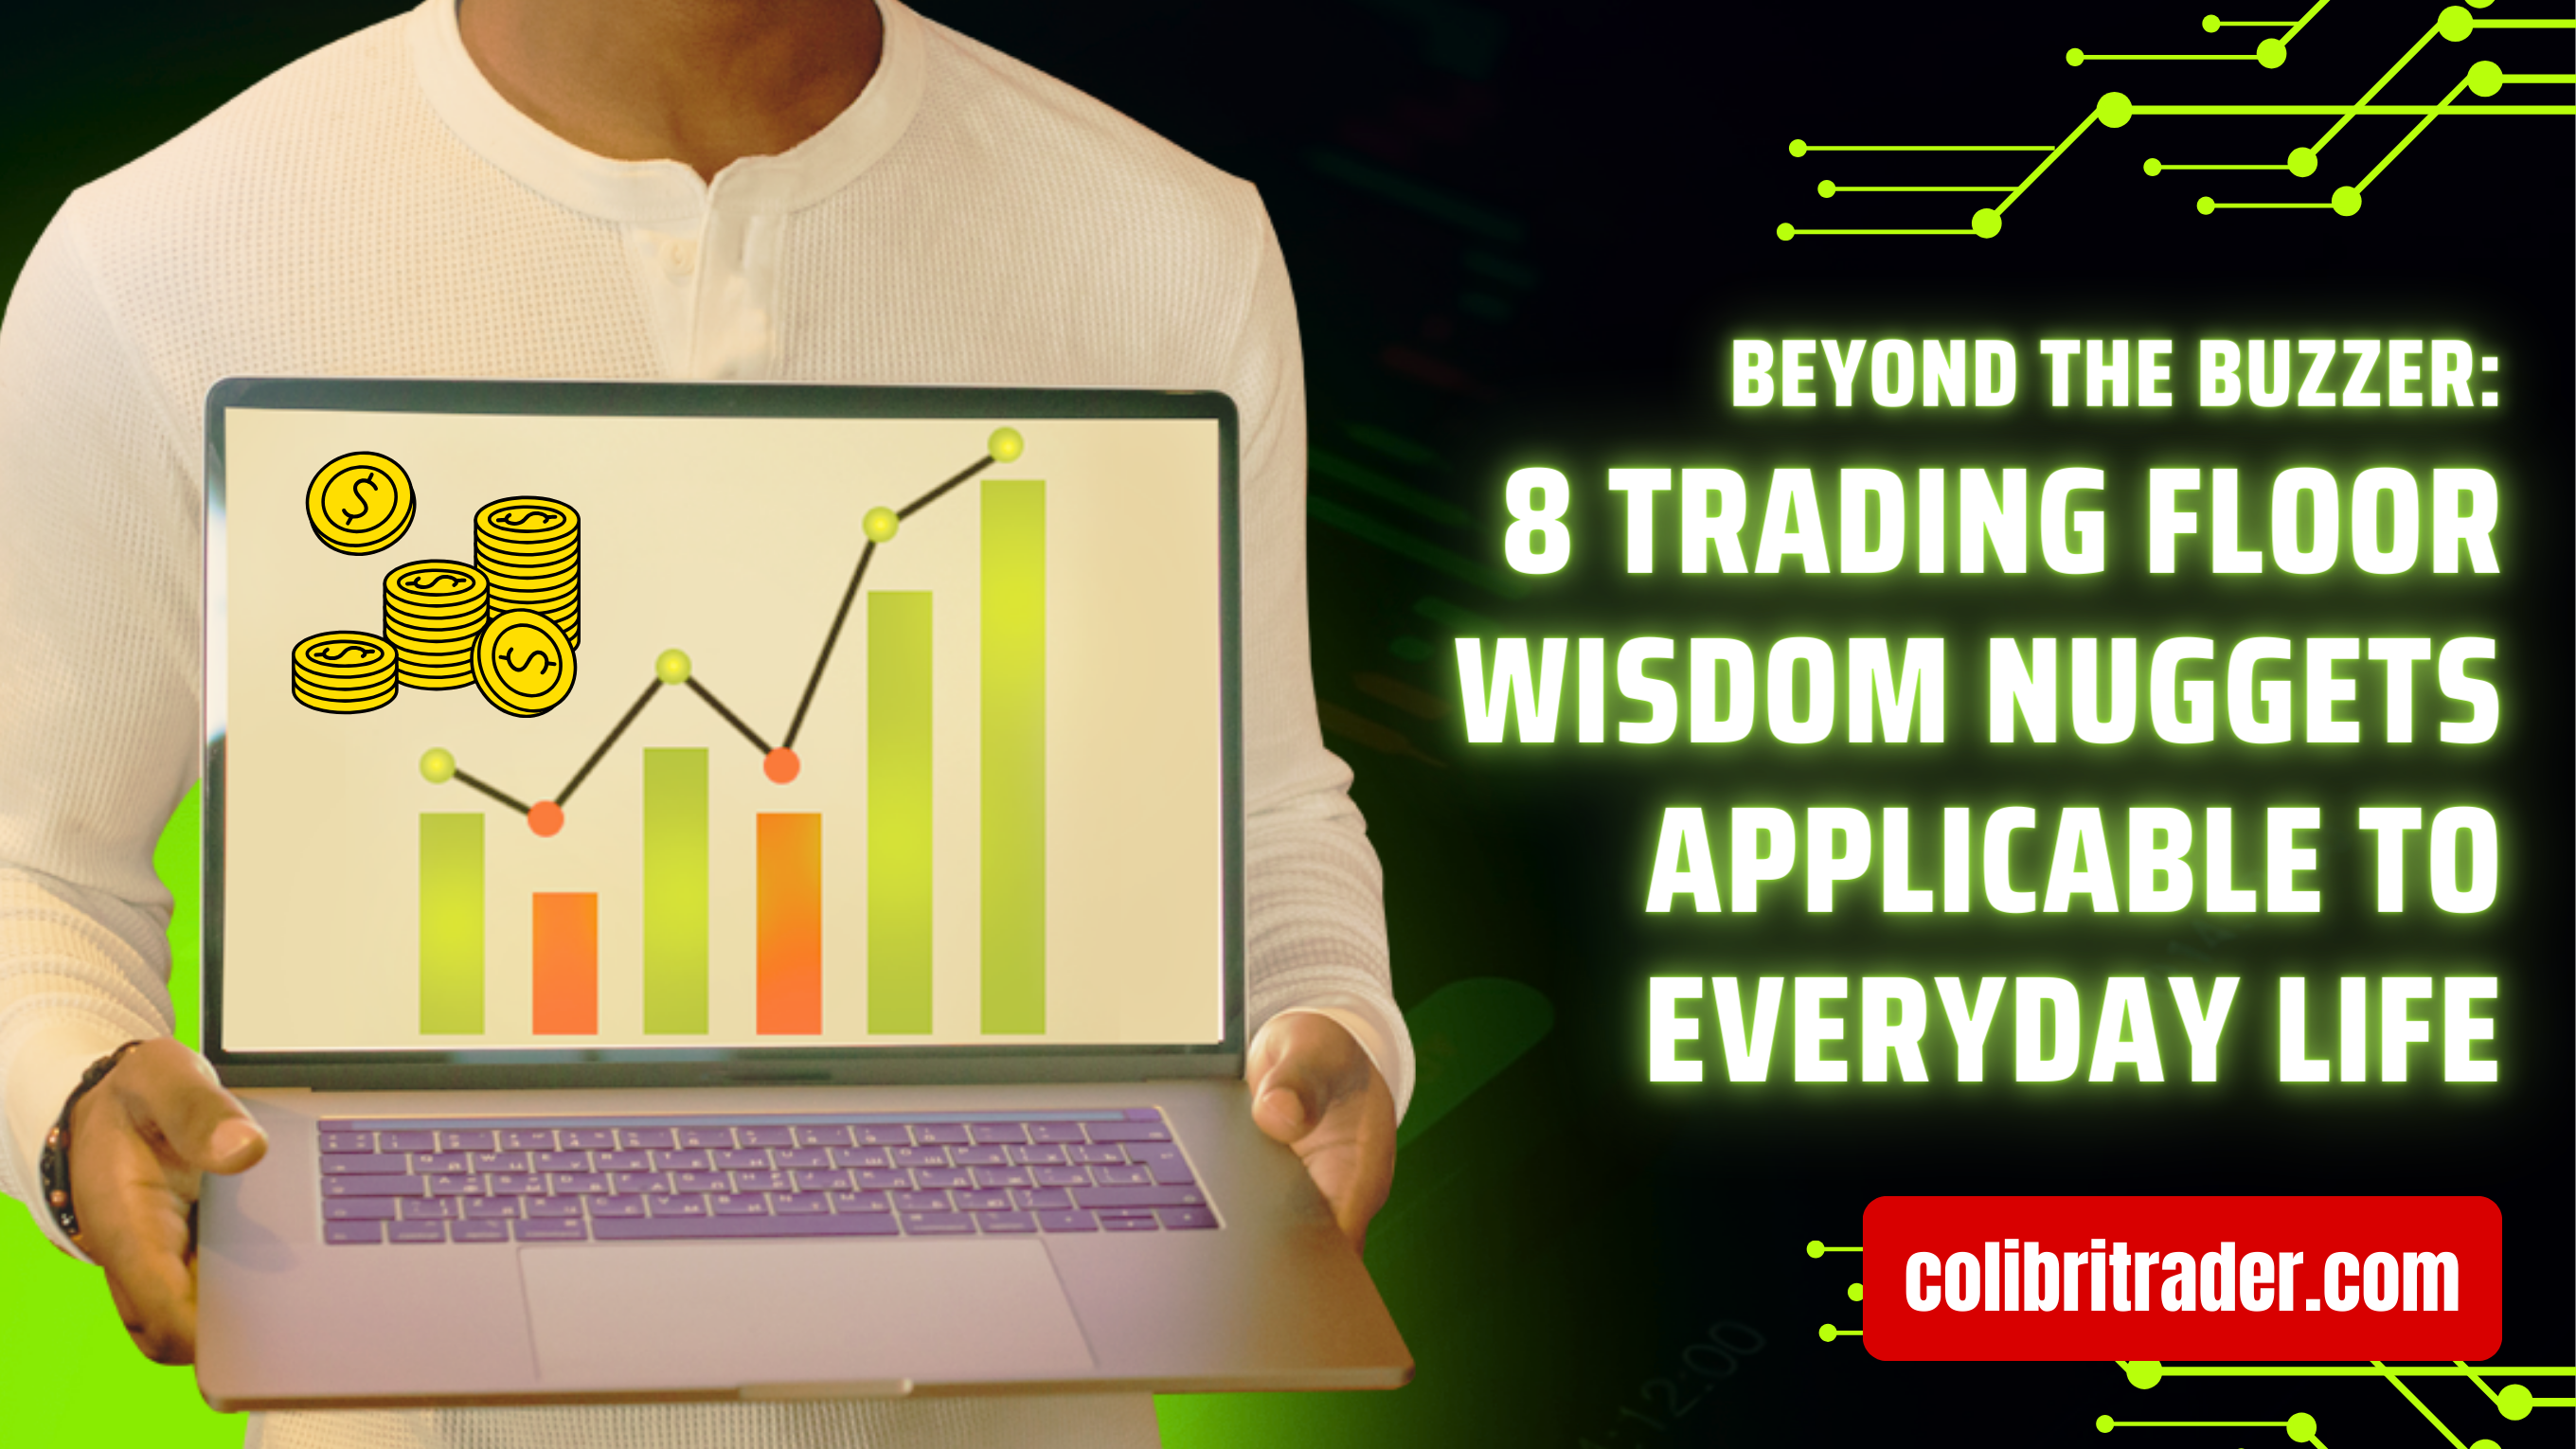 Beyond the Buzzer: 8 Trading Floor Wisdom Nuggets Applicable to Everyday Life